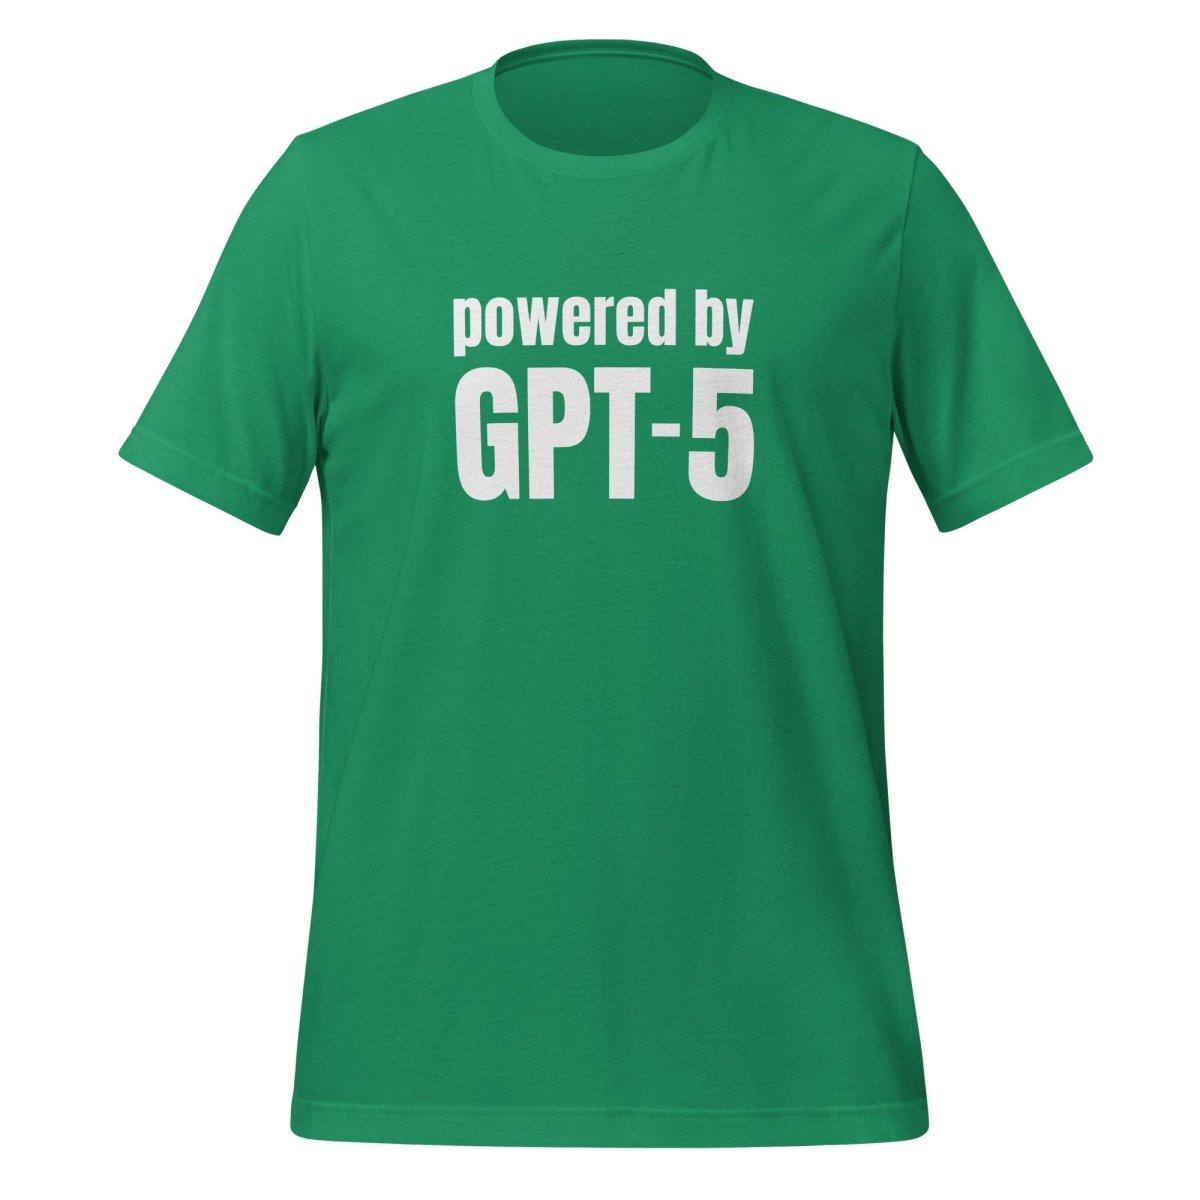 Powered by GPT - 5 T - Shirt (unisex) - Kelly - AI Store